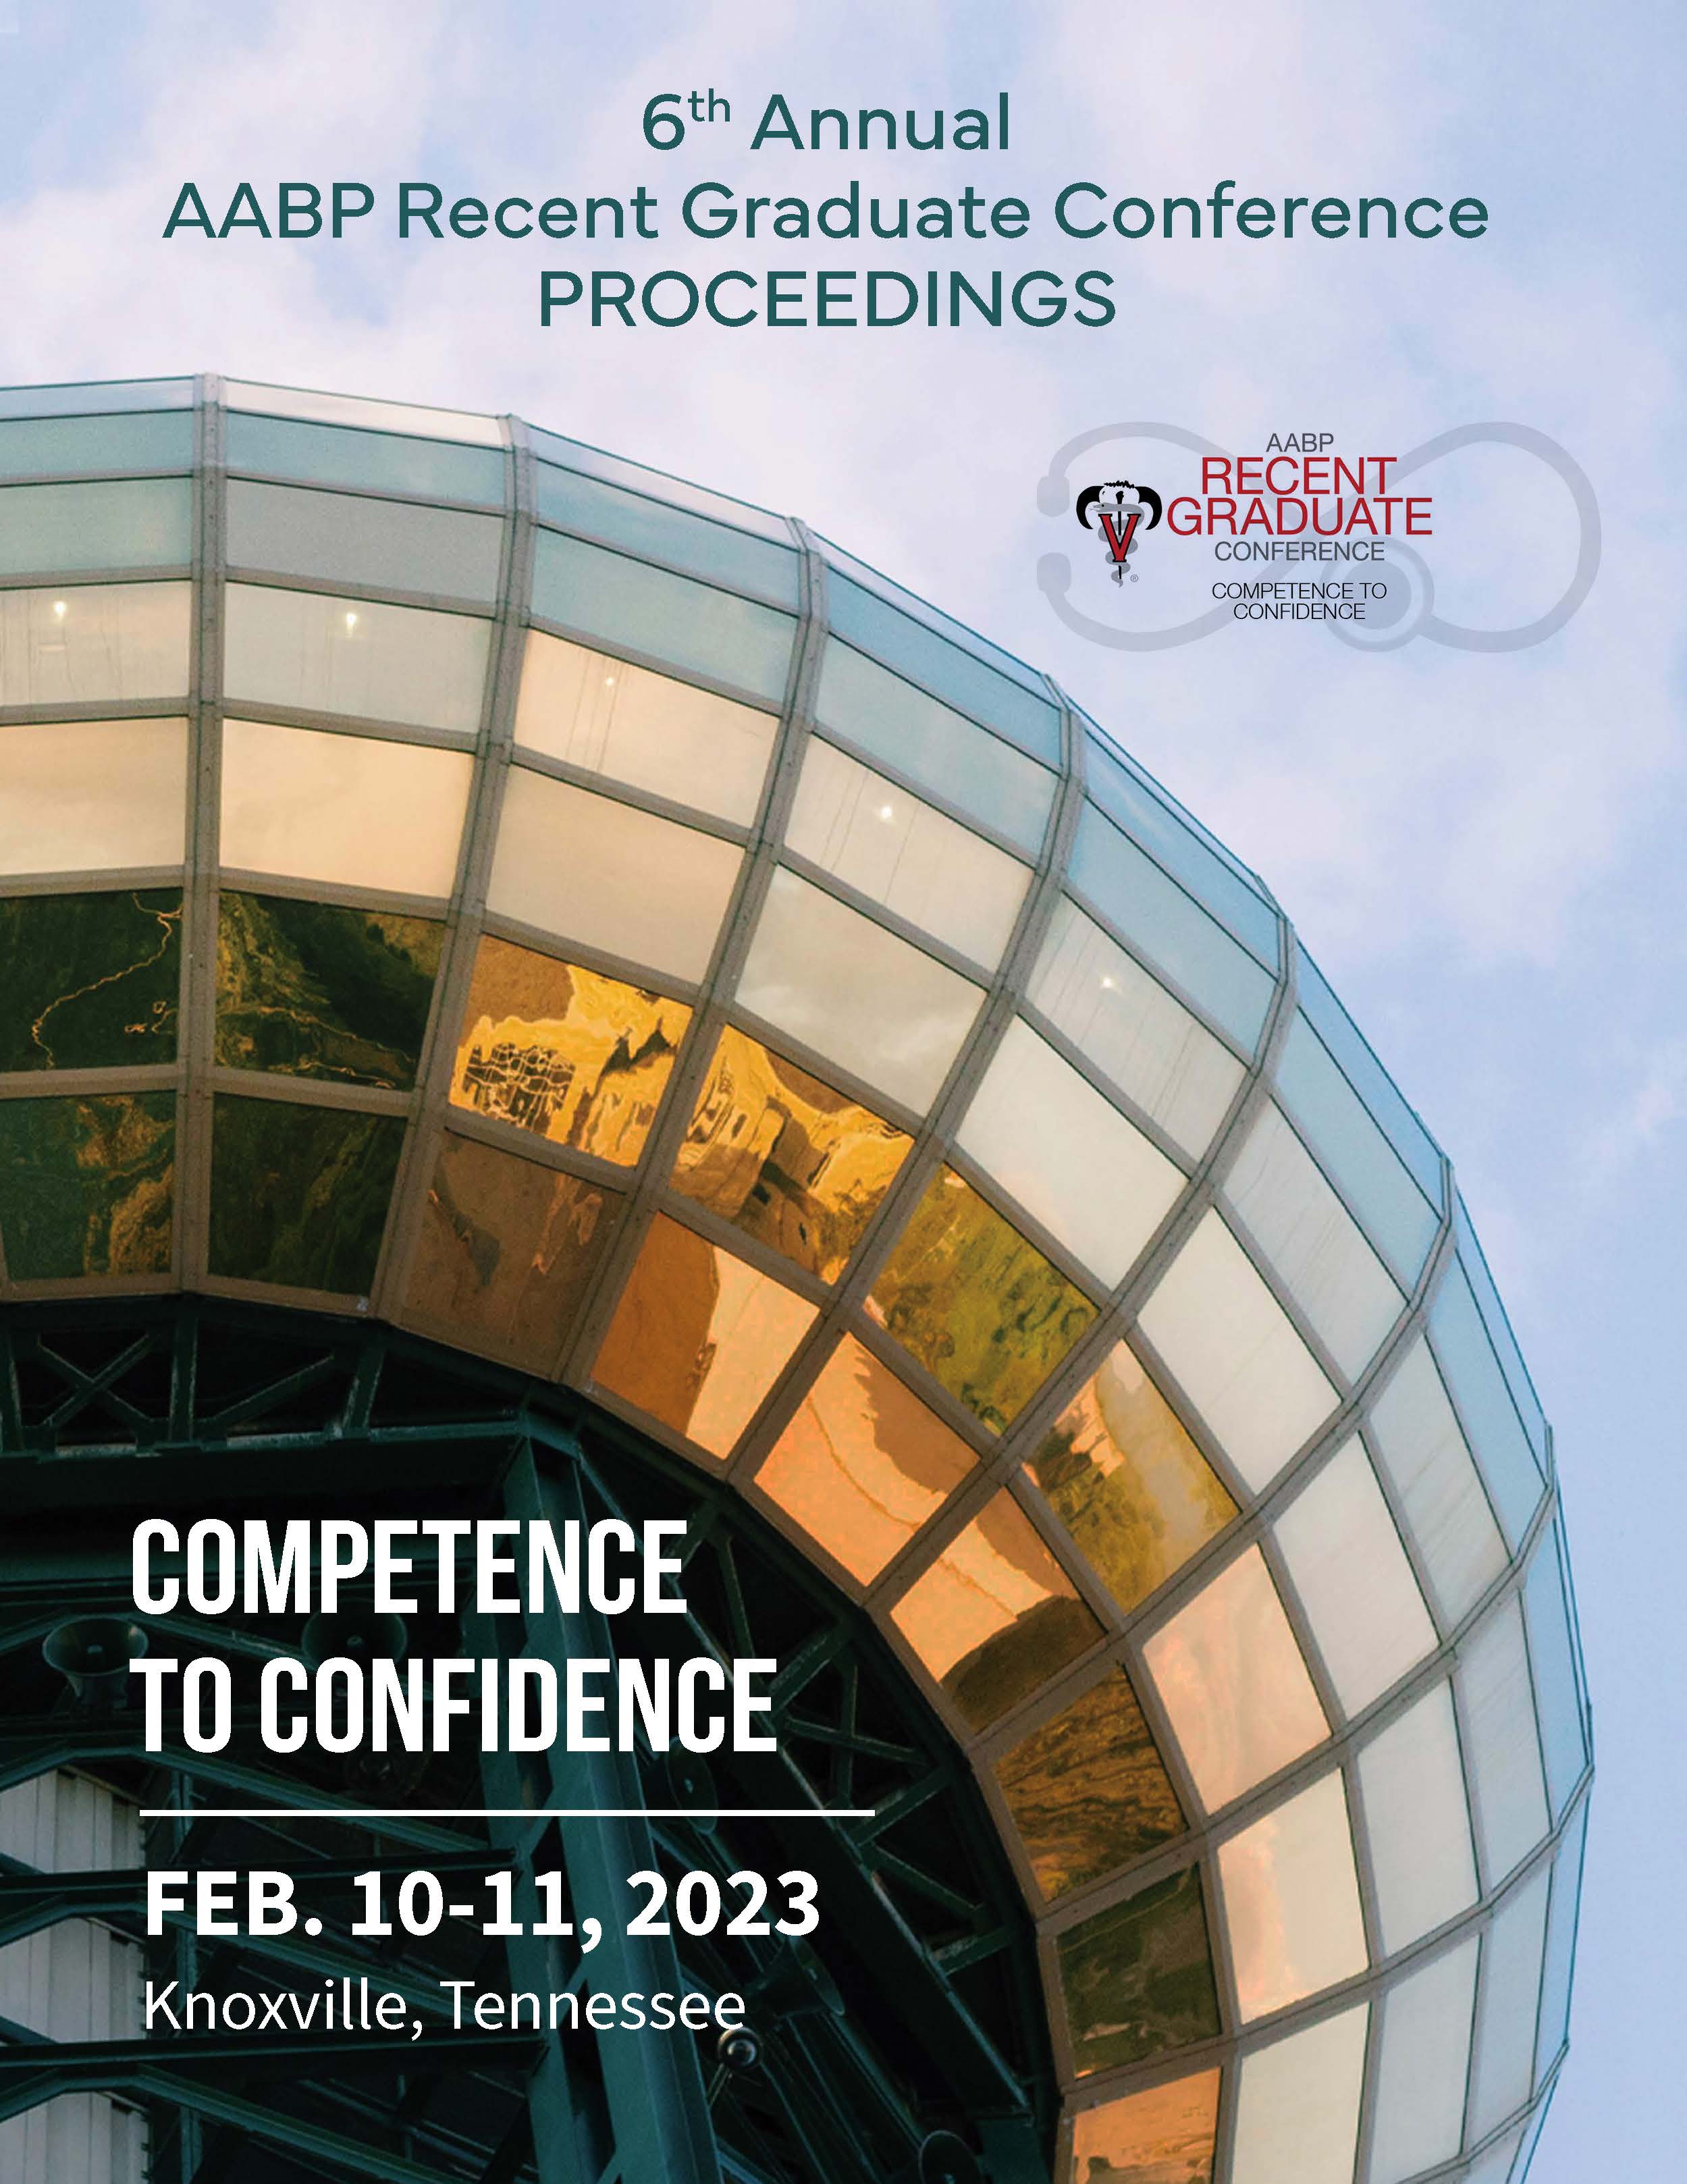 					View 2023 Recent Graduate Conference Proceedings
				